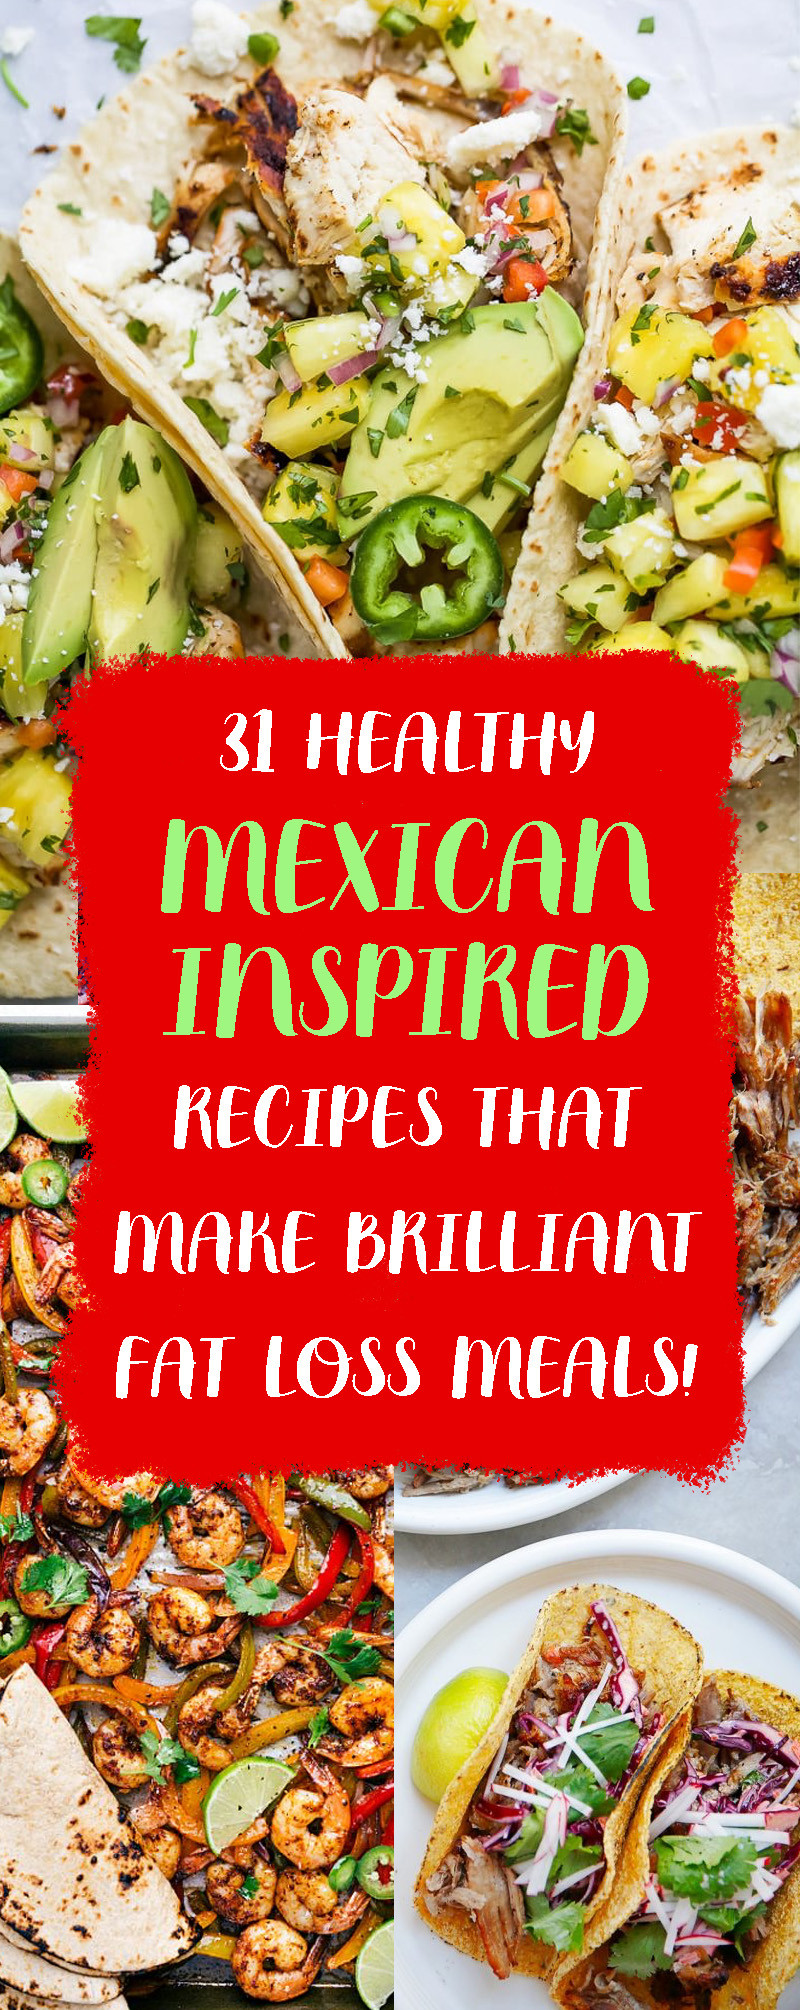 Healthy Mexican Recipes For Weight Loss
 31 Healthy Mexican Inspired Recipes That Make Brilliant